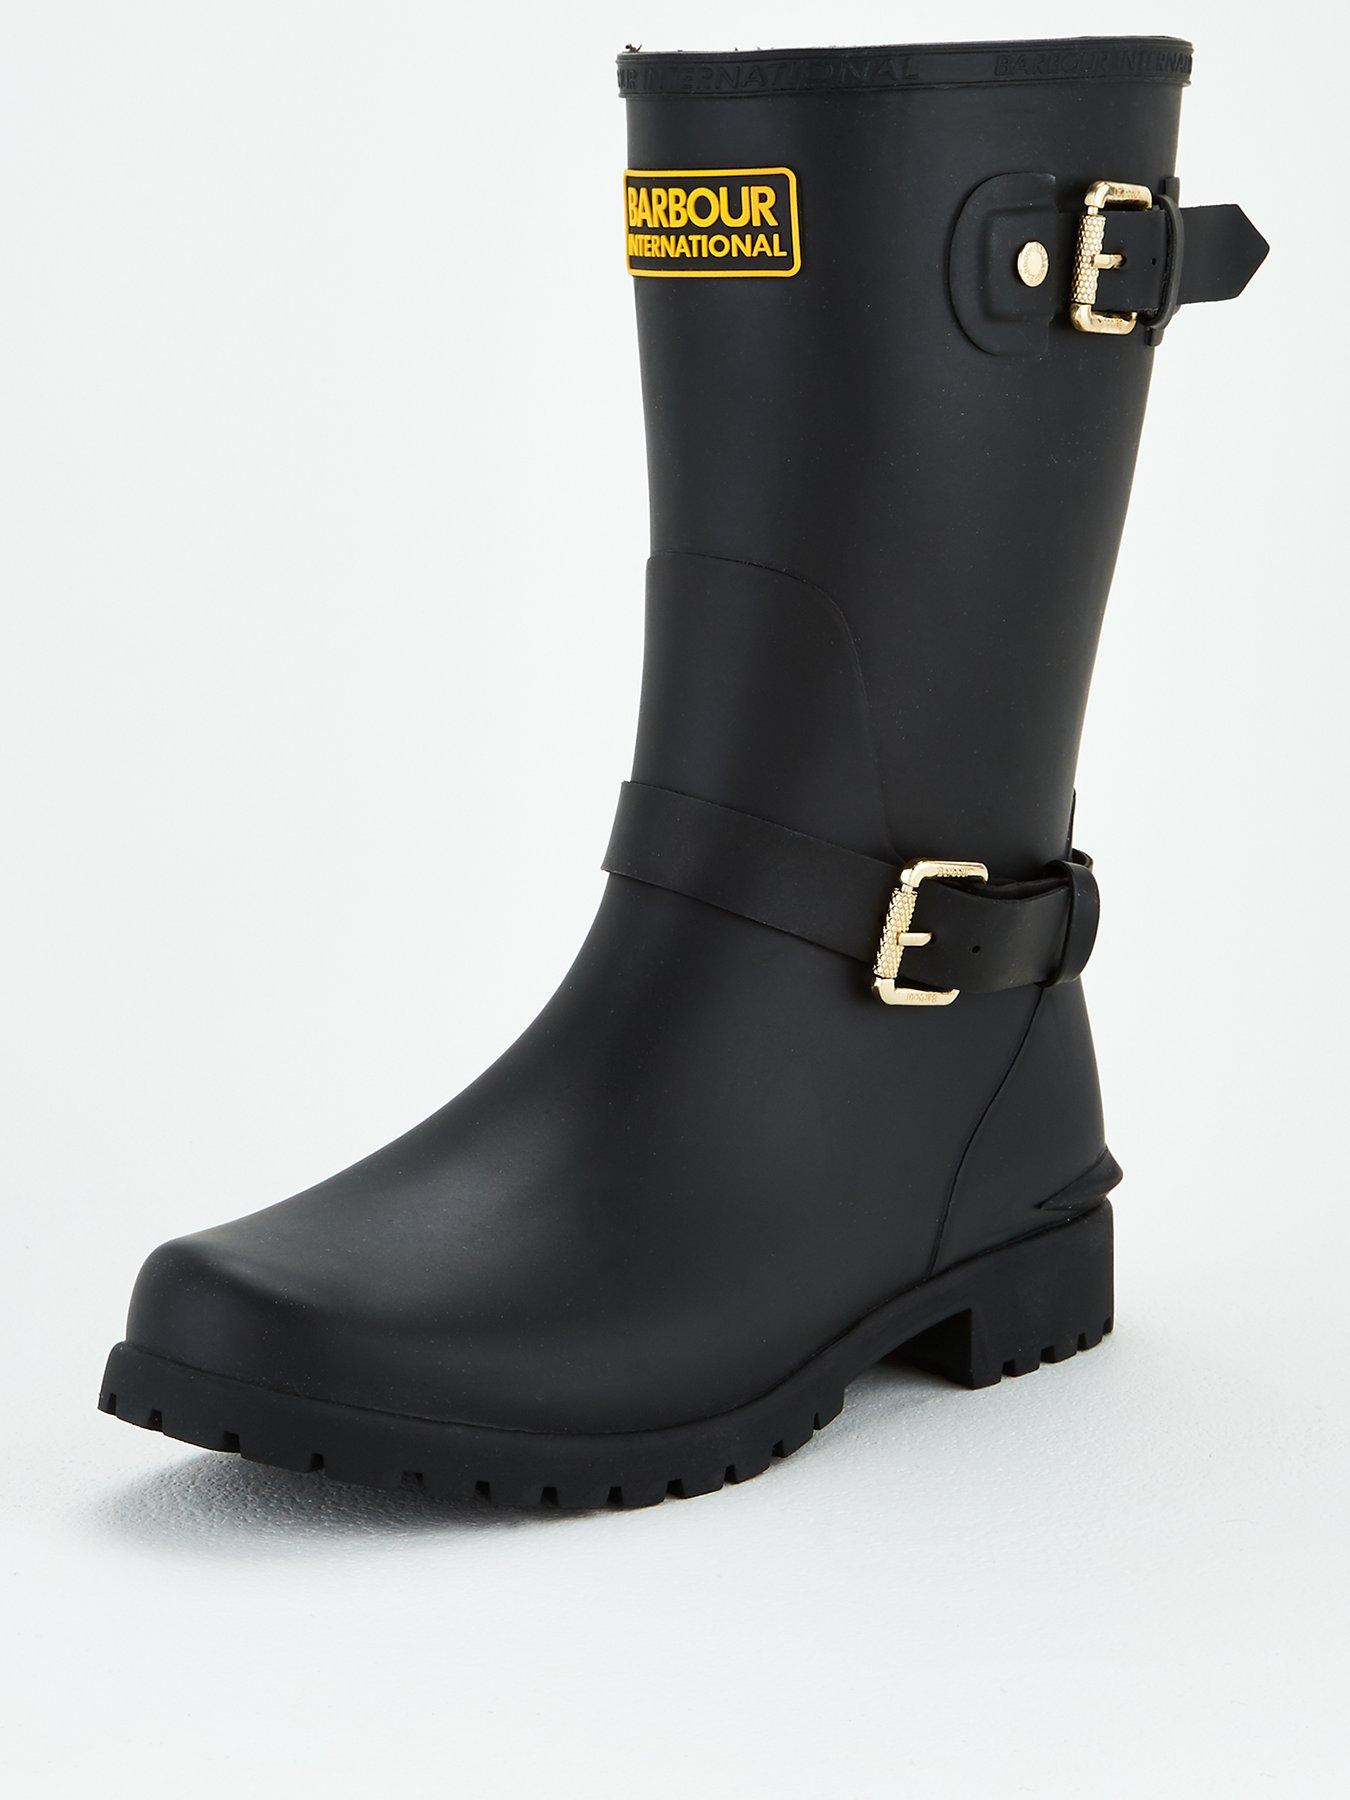 barbour monza welly